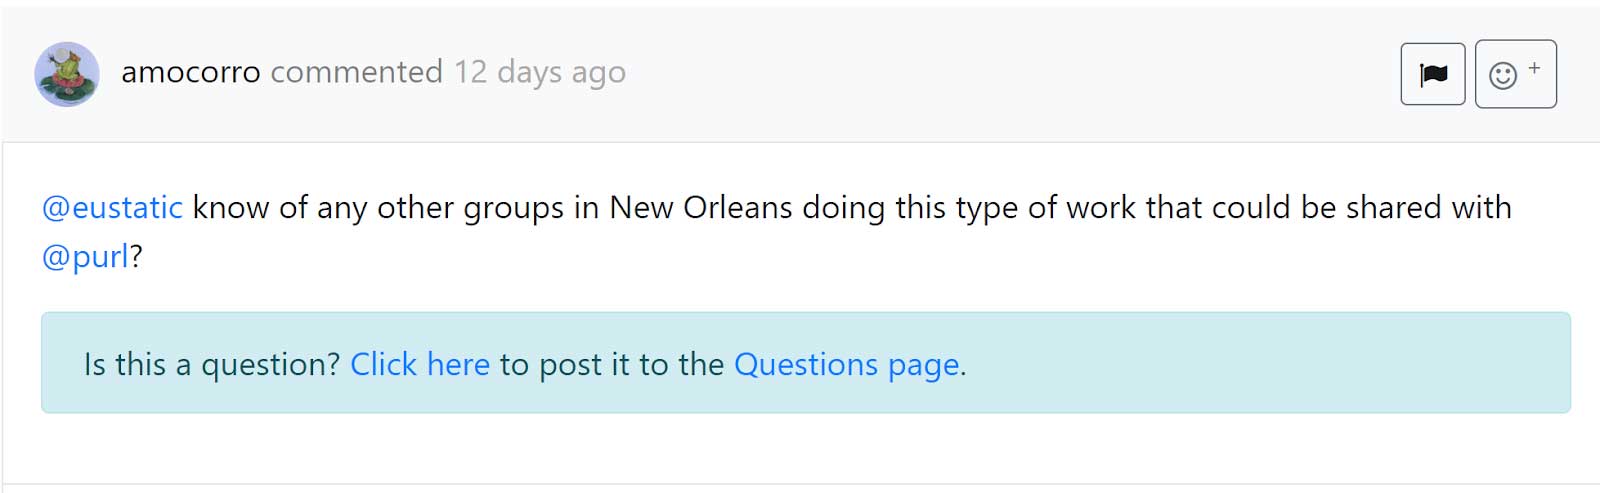 A screenshot of a comment a user posted under a research note, with an affordance that allows the user to transform this comment into a question.